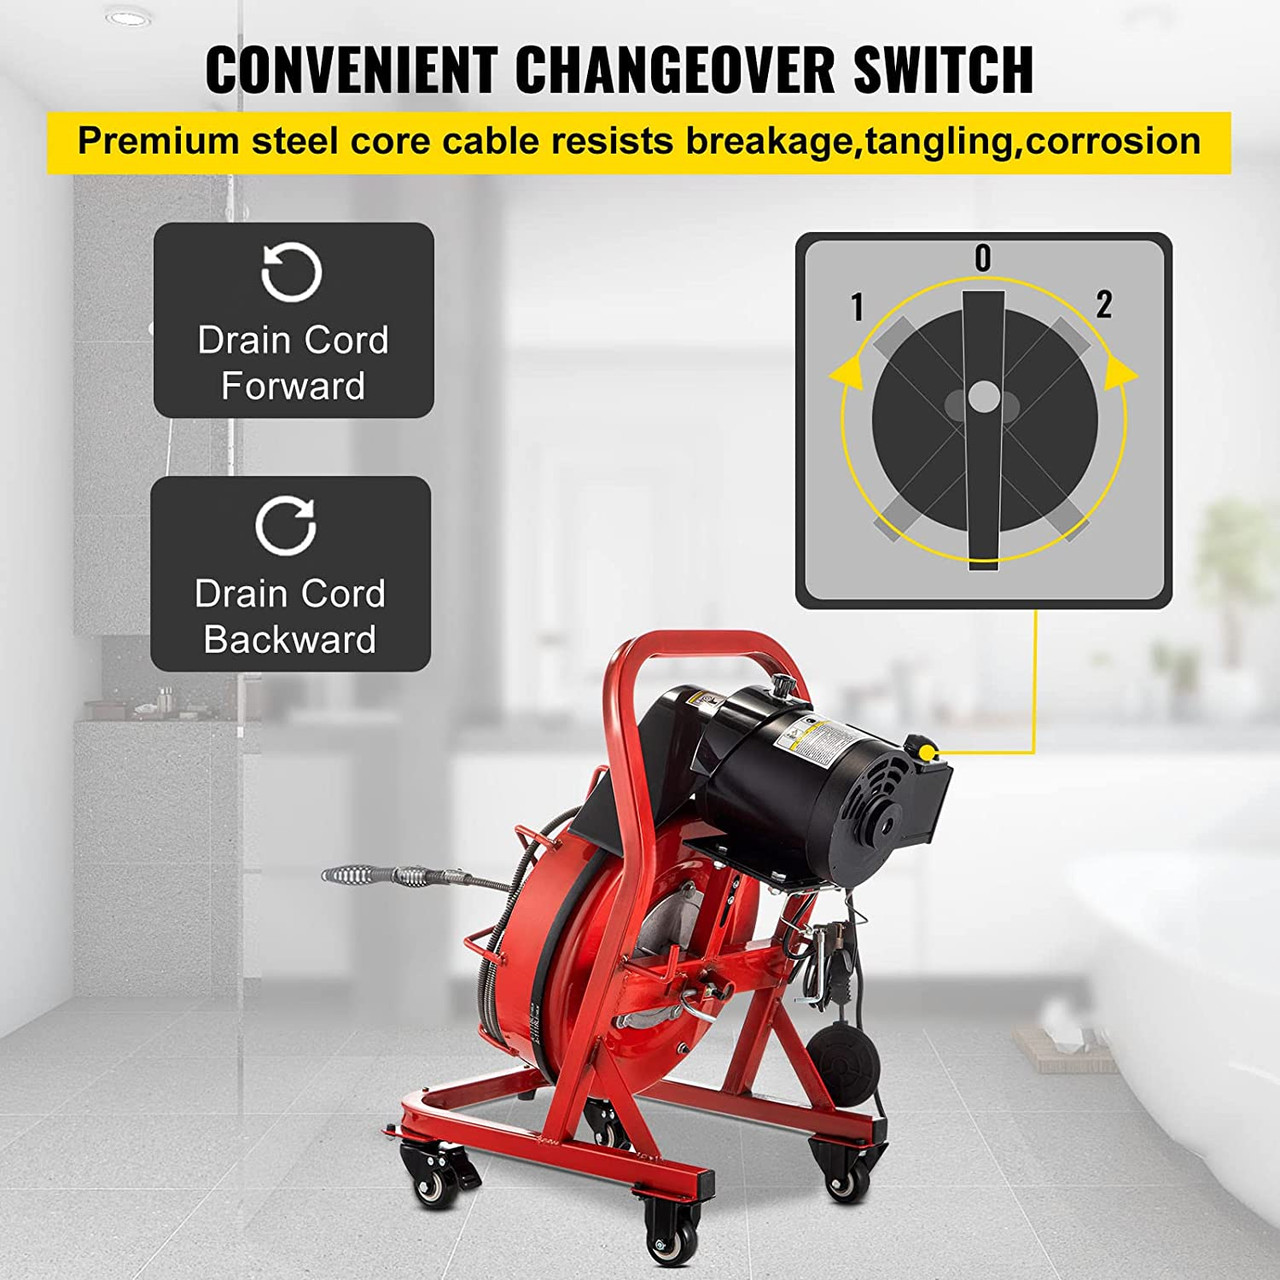 VEVOR Electric Drain Auger Cleaner, 26 ft x 1/3 in Cable Sewer Snake  Machine with Gloves, Portable Plumbing Tool for Unclogging 0.8 to 2.6 inch  Pipes at Sinks/Tubs/Toilets/Kitchen, 700W Red